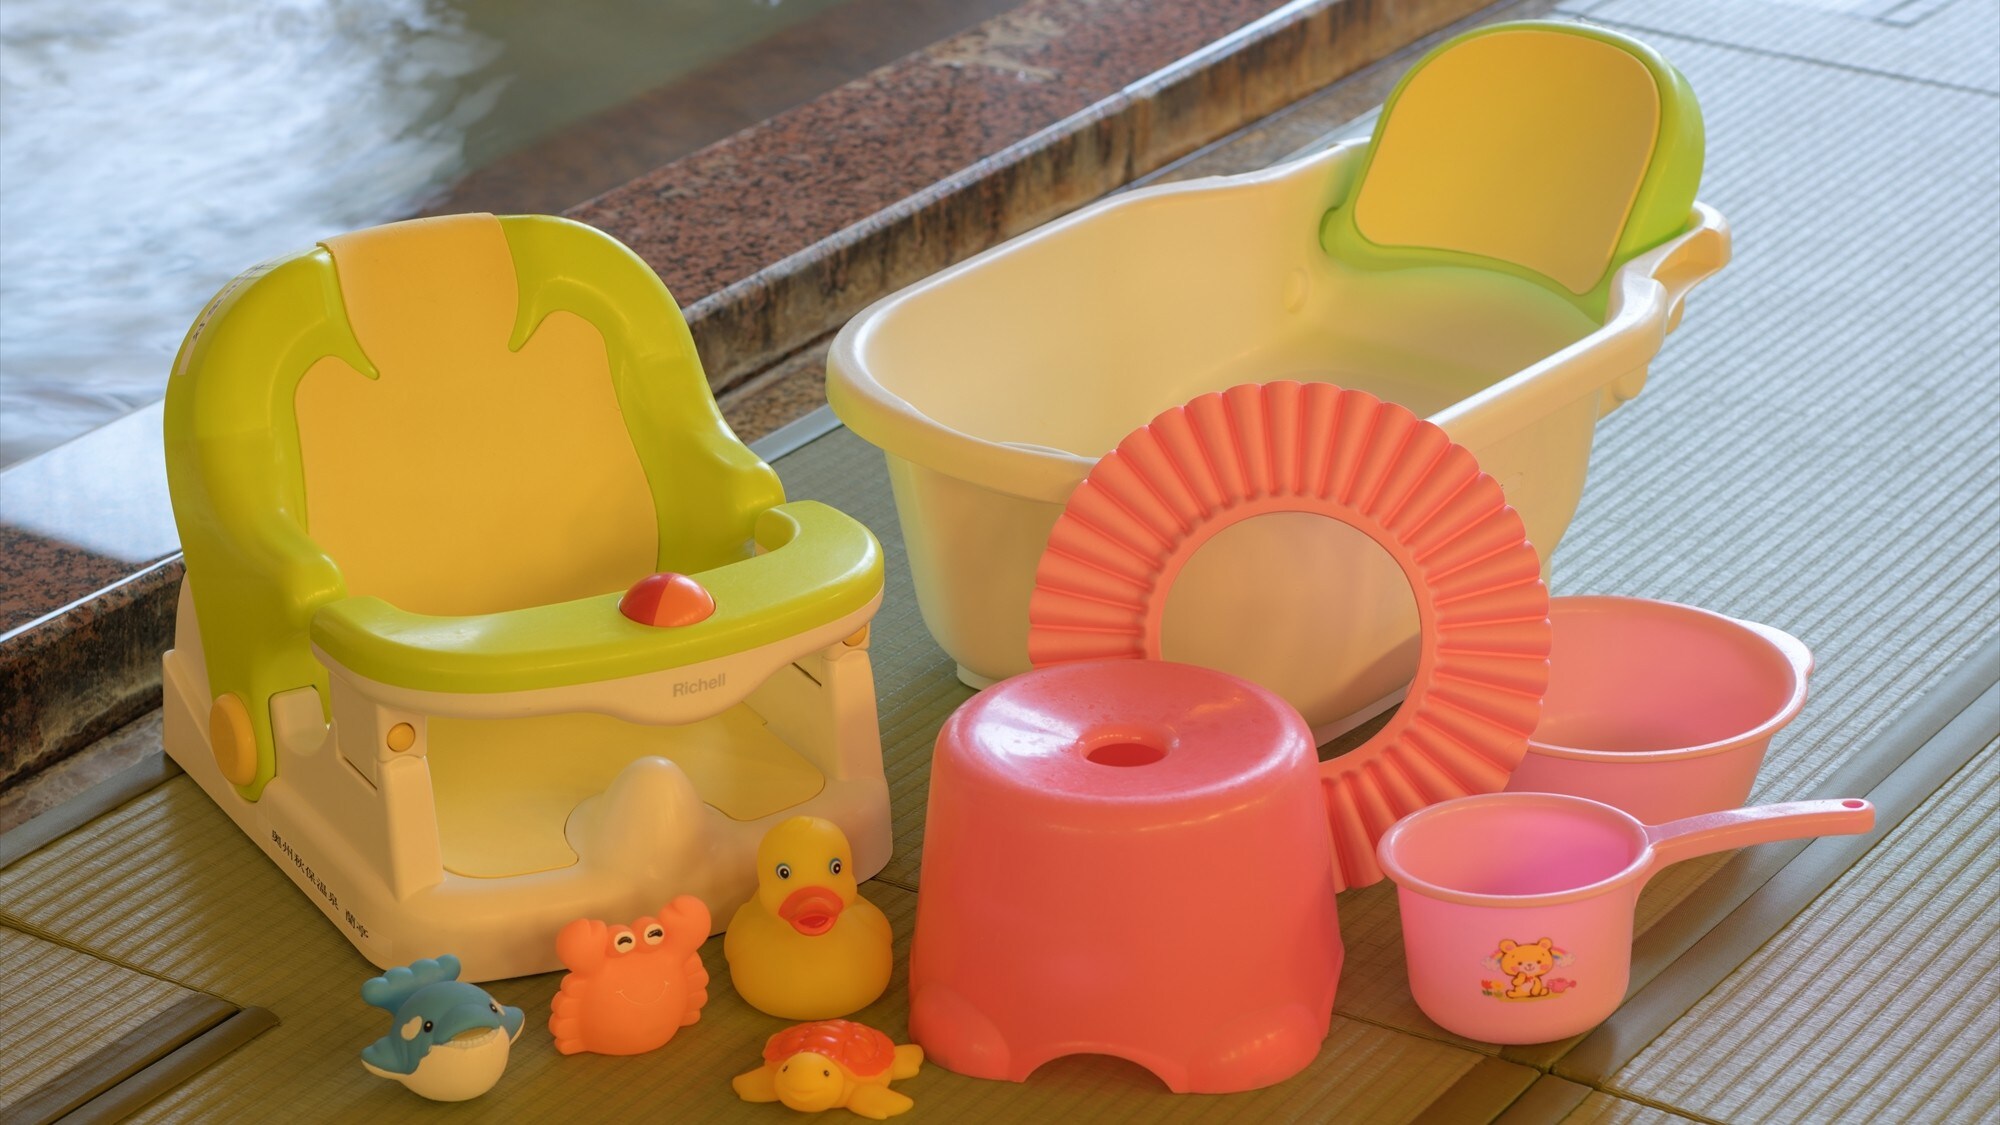 [Large communal bath] Children's goods can be rented at the large communal bath.